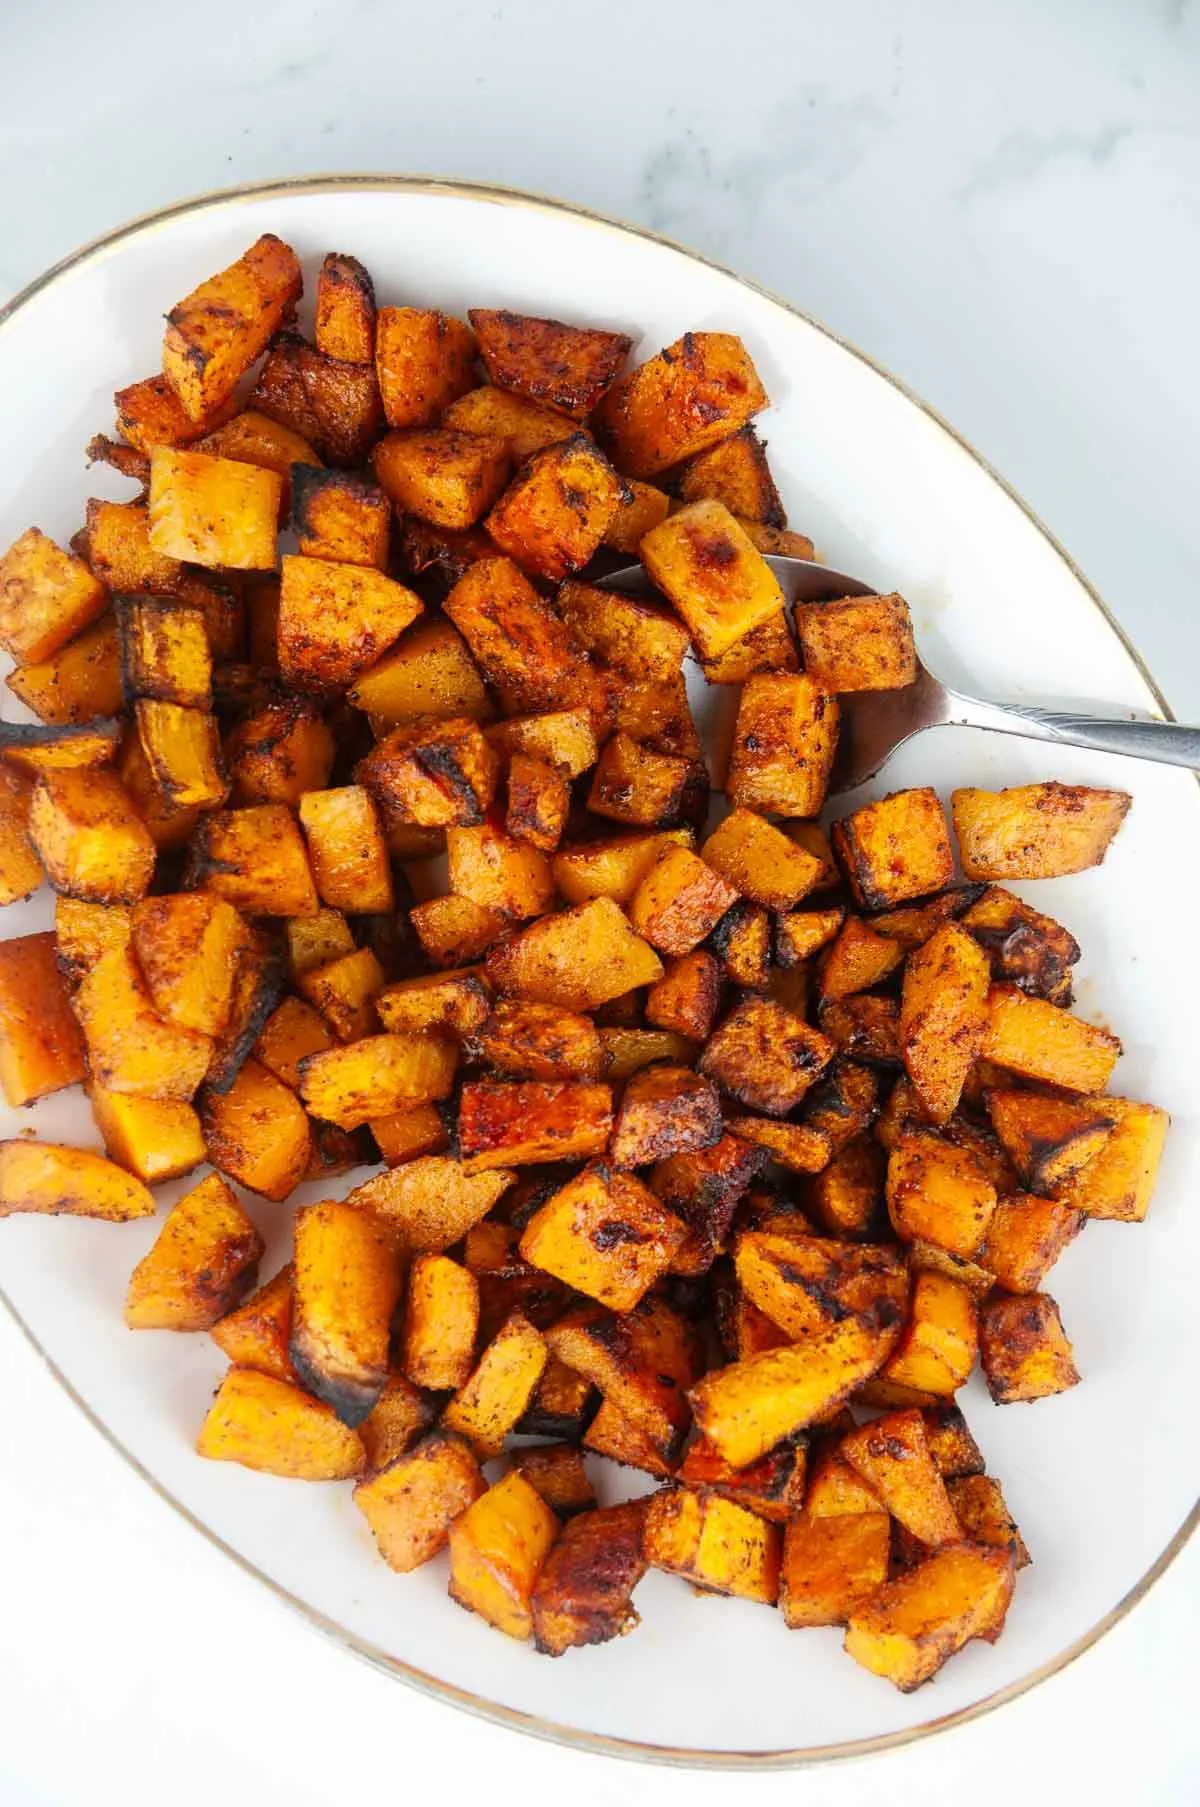 Roasted spice butternut squash is a savory butternut squash recipe with bold flavors like chili powder and garlic. This is a standout variation on traditional sweet roasted squash recipes!